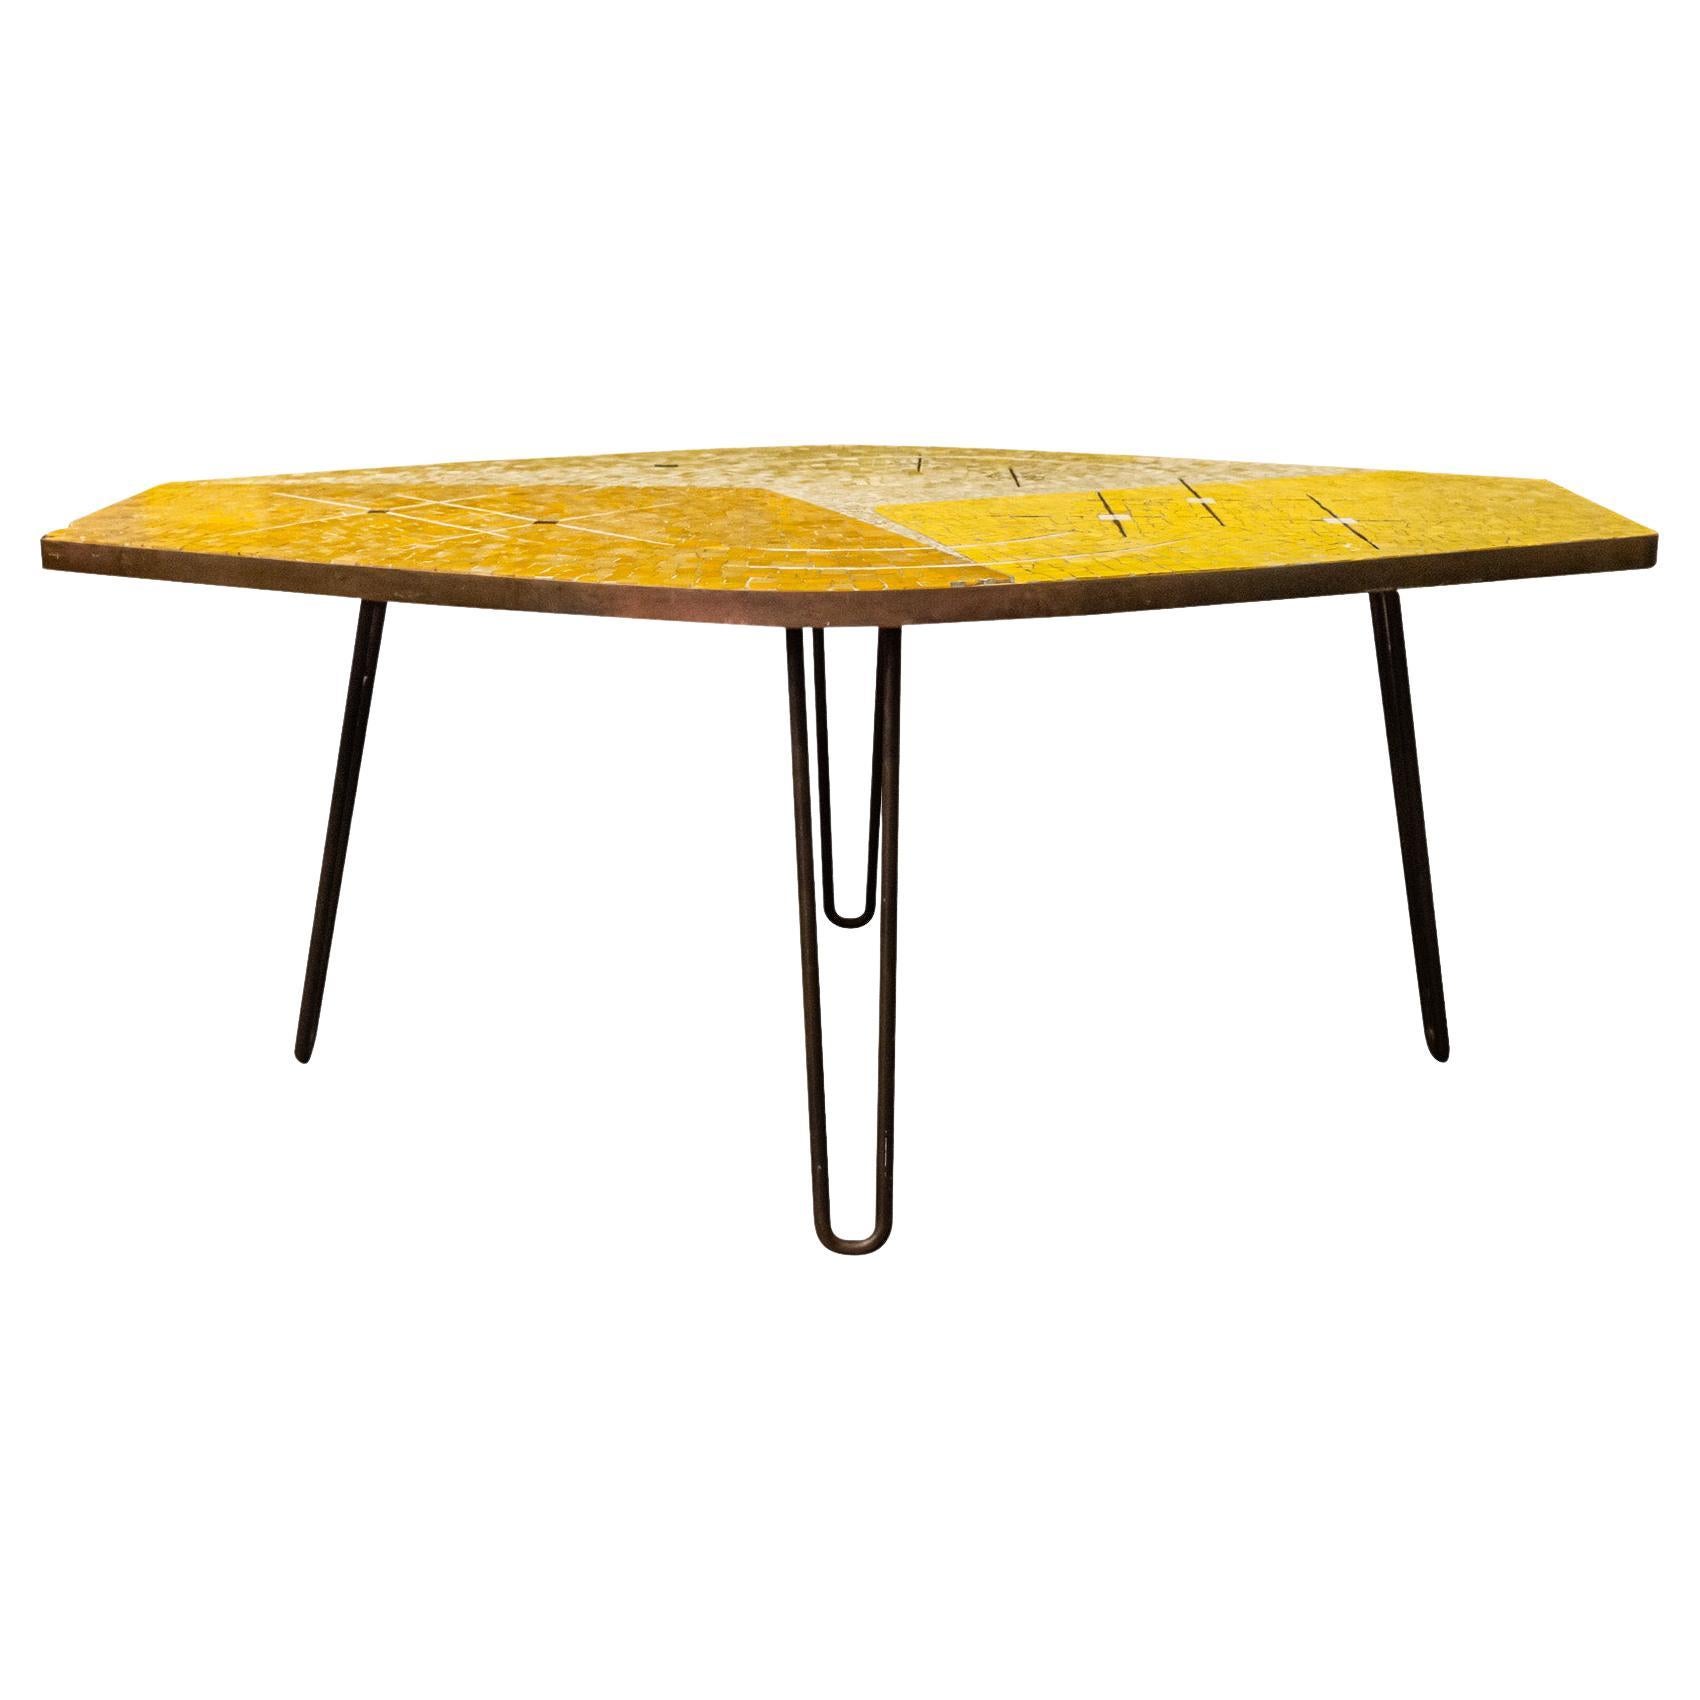 Berthold Müller (1893-1979), table,
Quadripod iron base,
Hexagonal tray composed of small mosaic ceramic tiles with geometric decoration in yellow and orange tones,
circa 1950, Germany.

Measures : width 126 cm, depth 76 cm, height 49